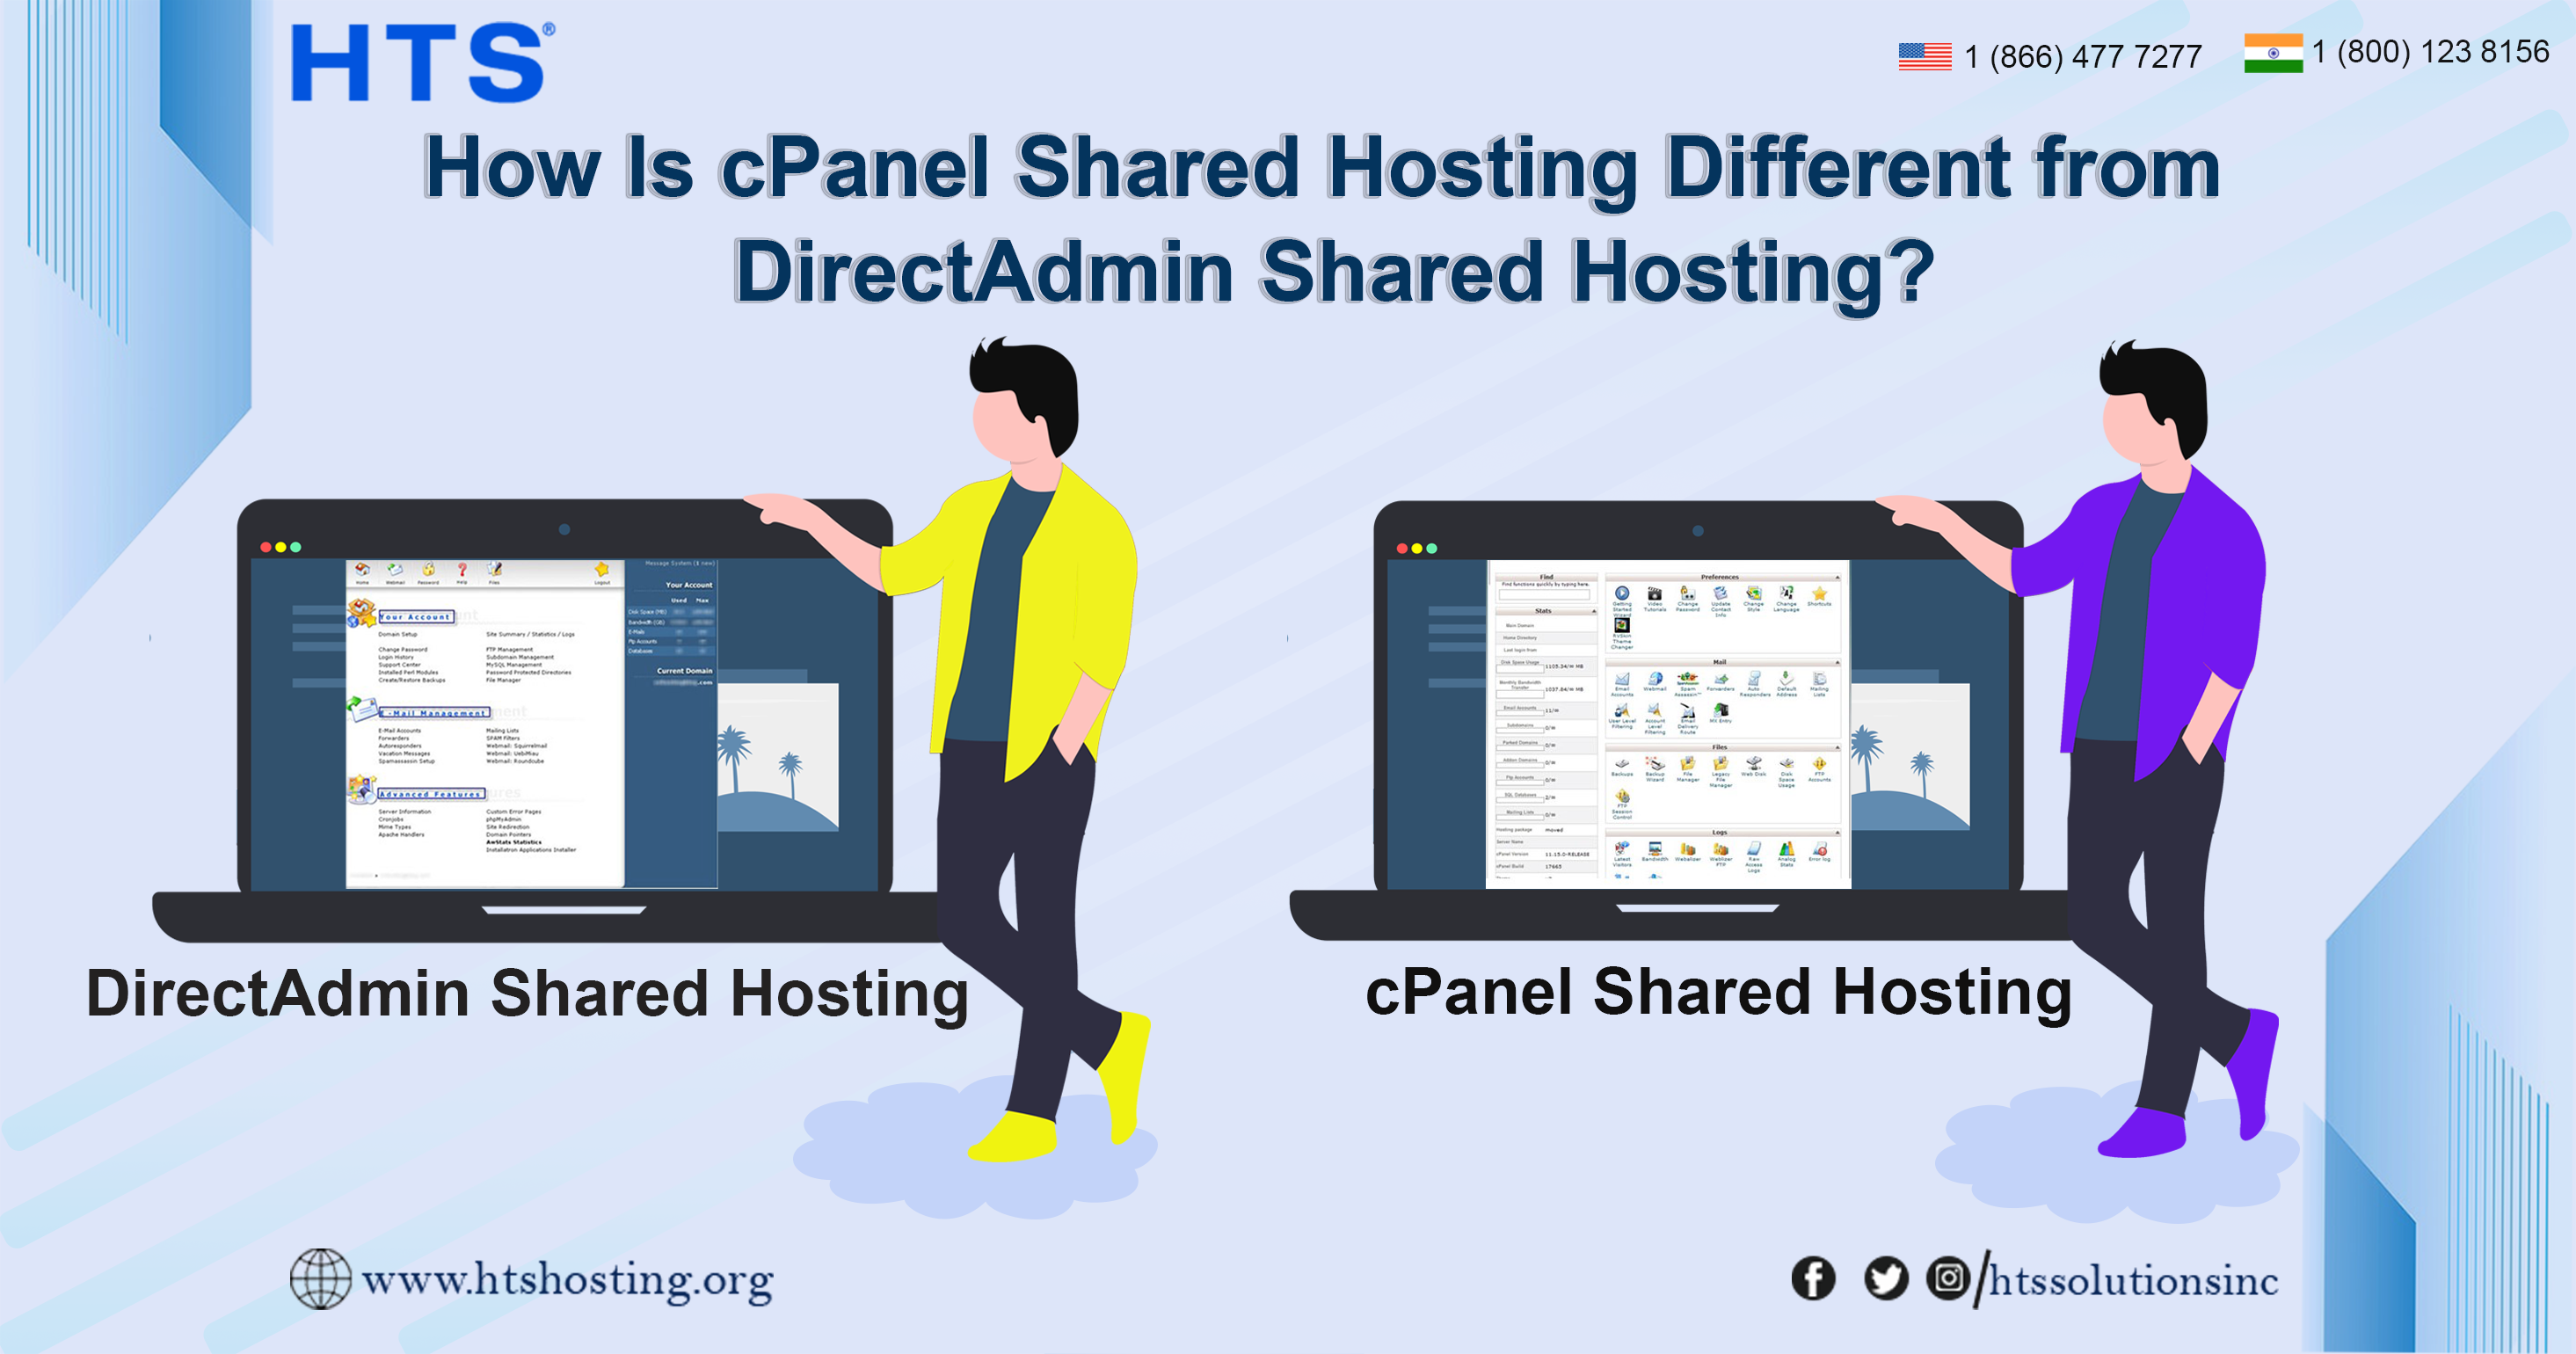 How Is cPanel Shared Hosting Different from DirectAdmin Shared Hosting?